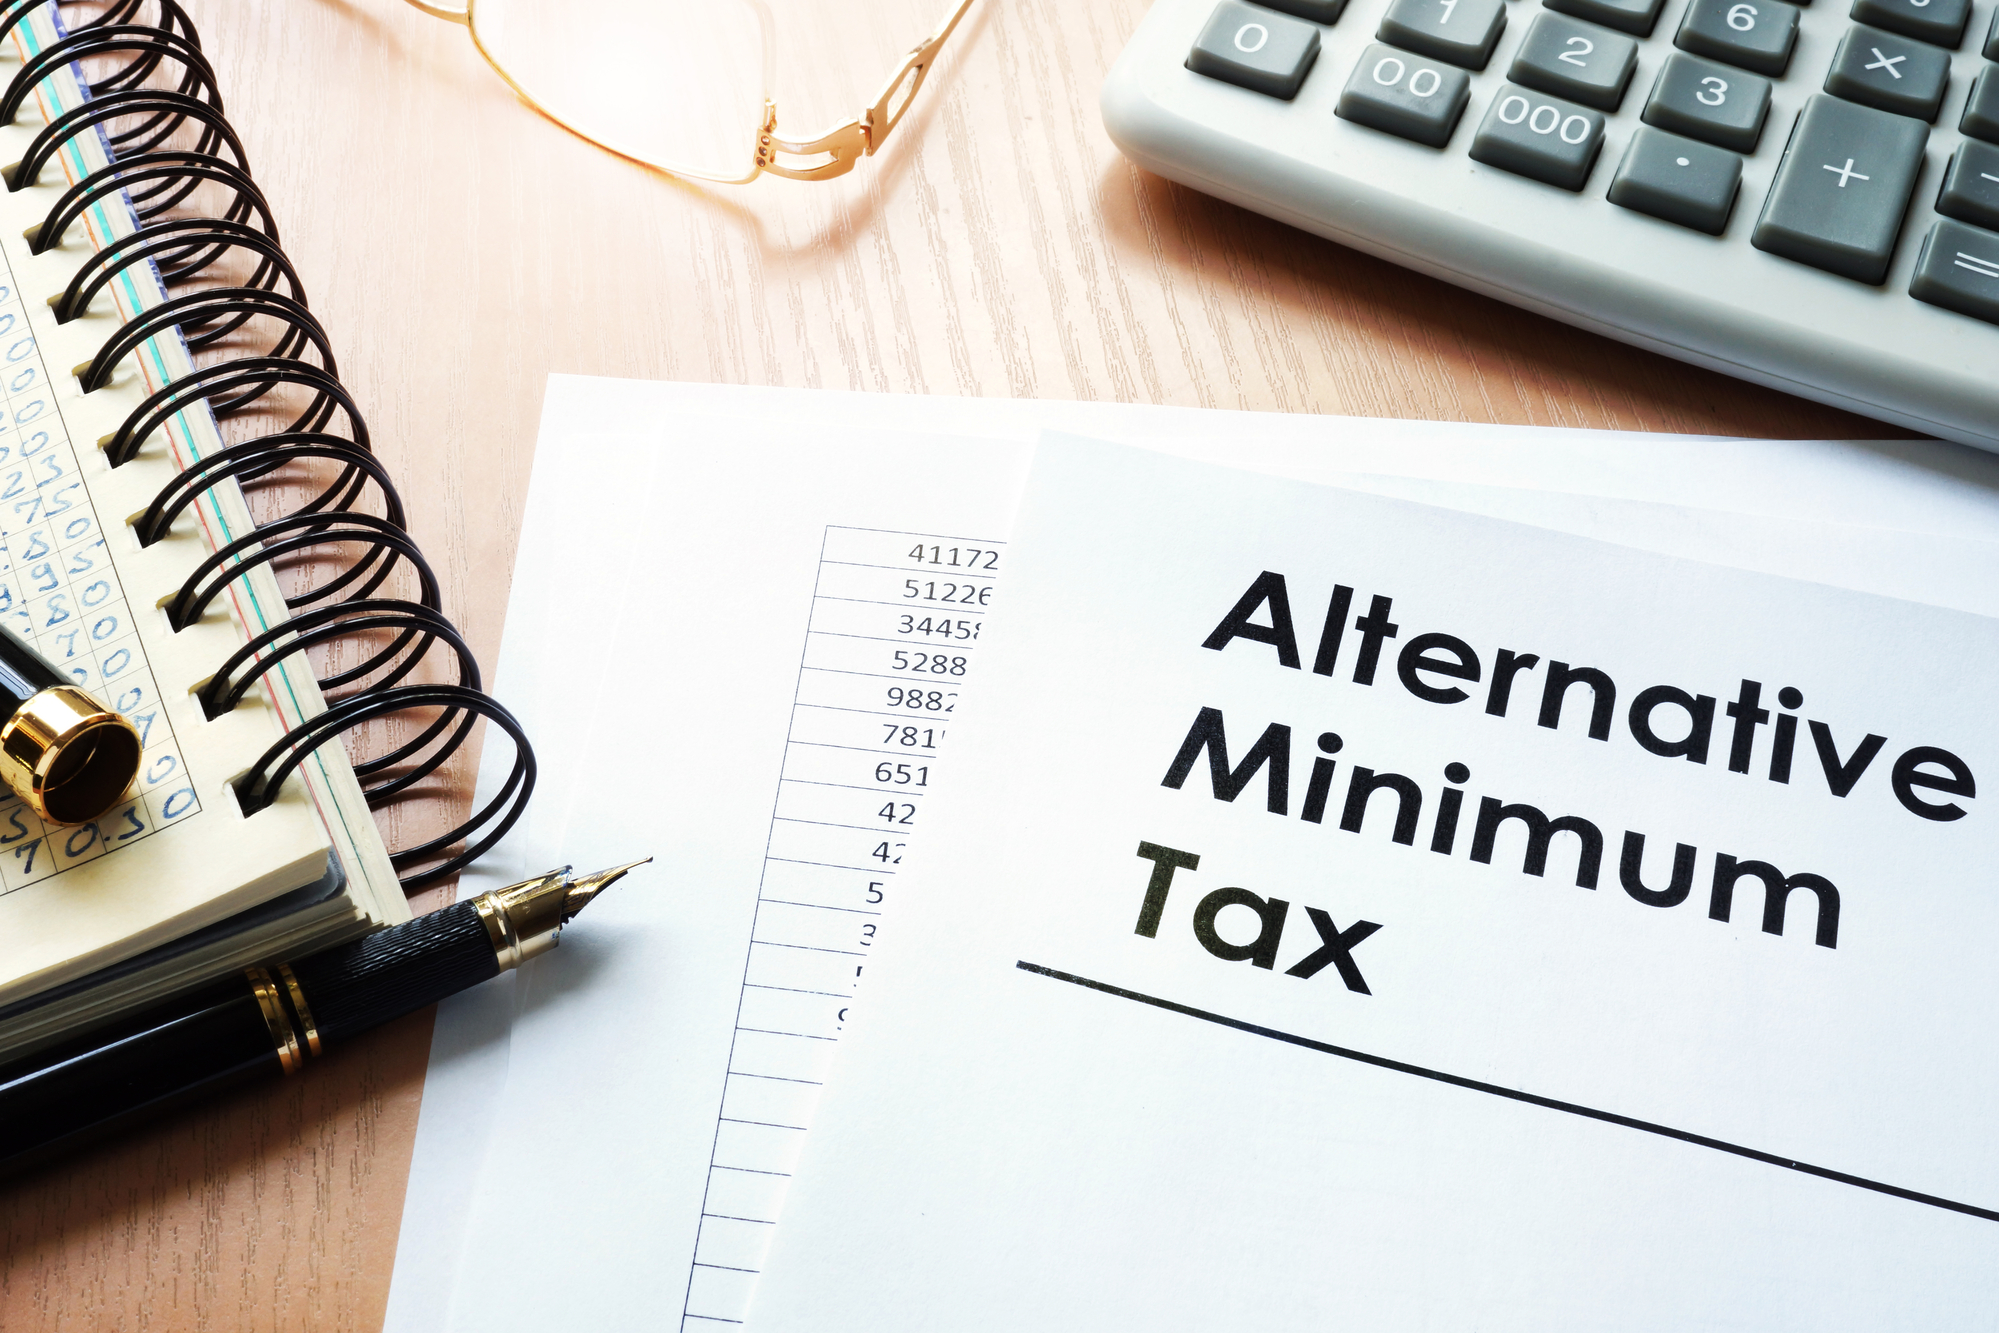 A document titled “alternative minimum tax” sits on a desk next to a spreadsheet of financial figures, a calculator, and a notebook.